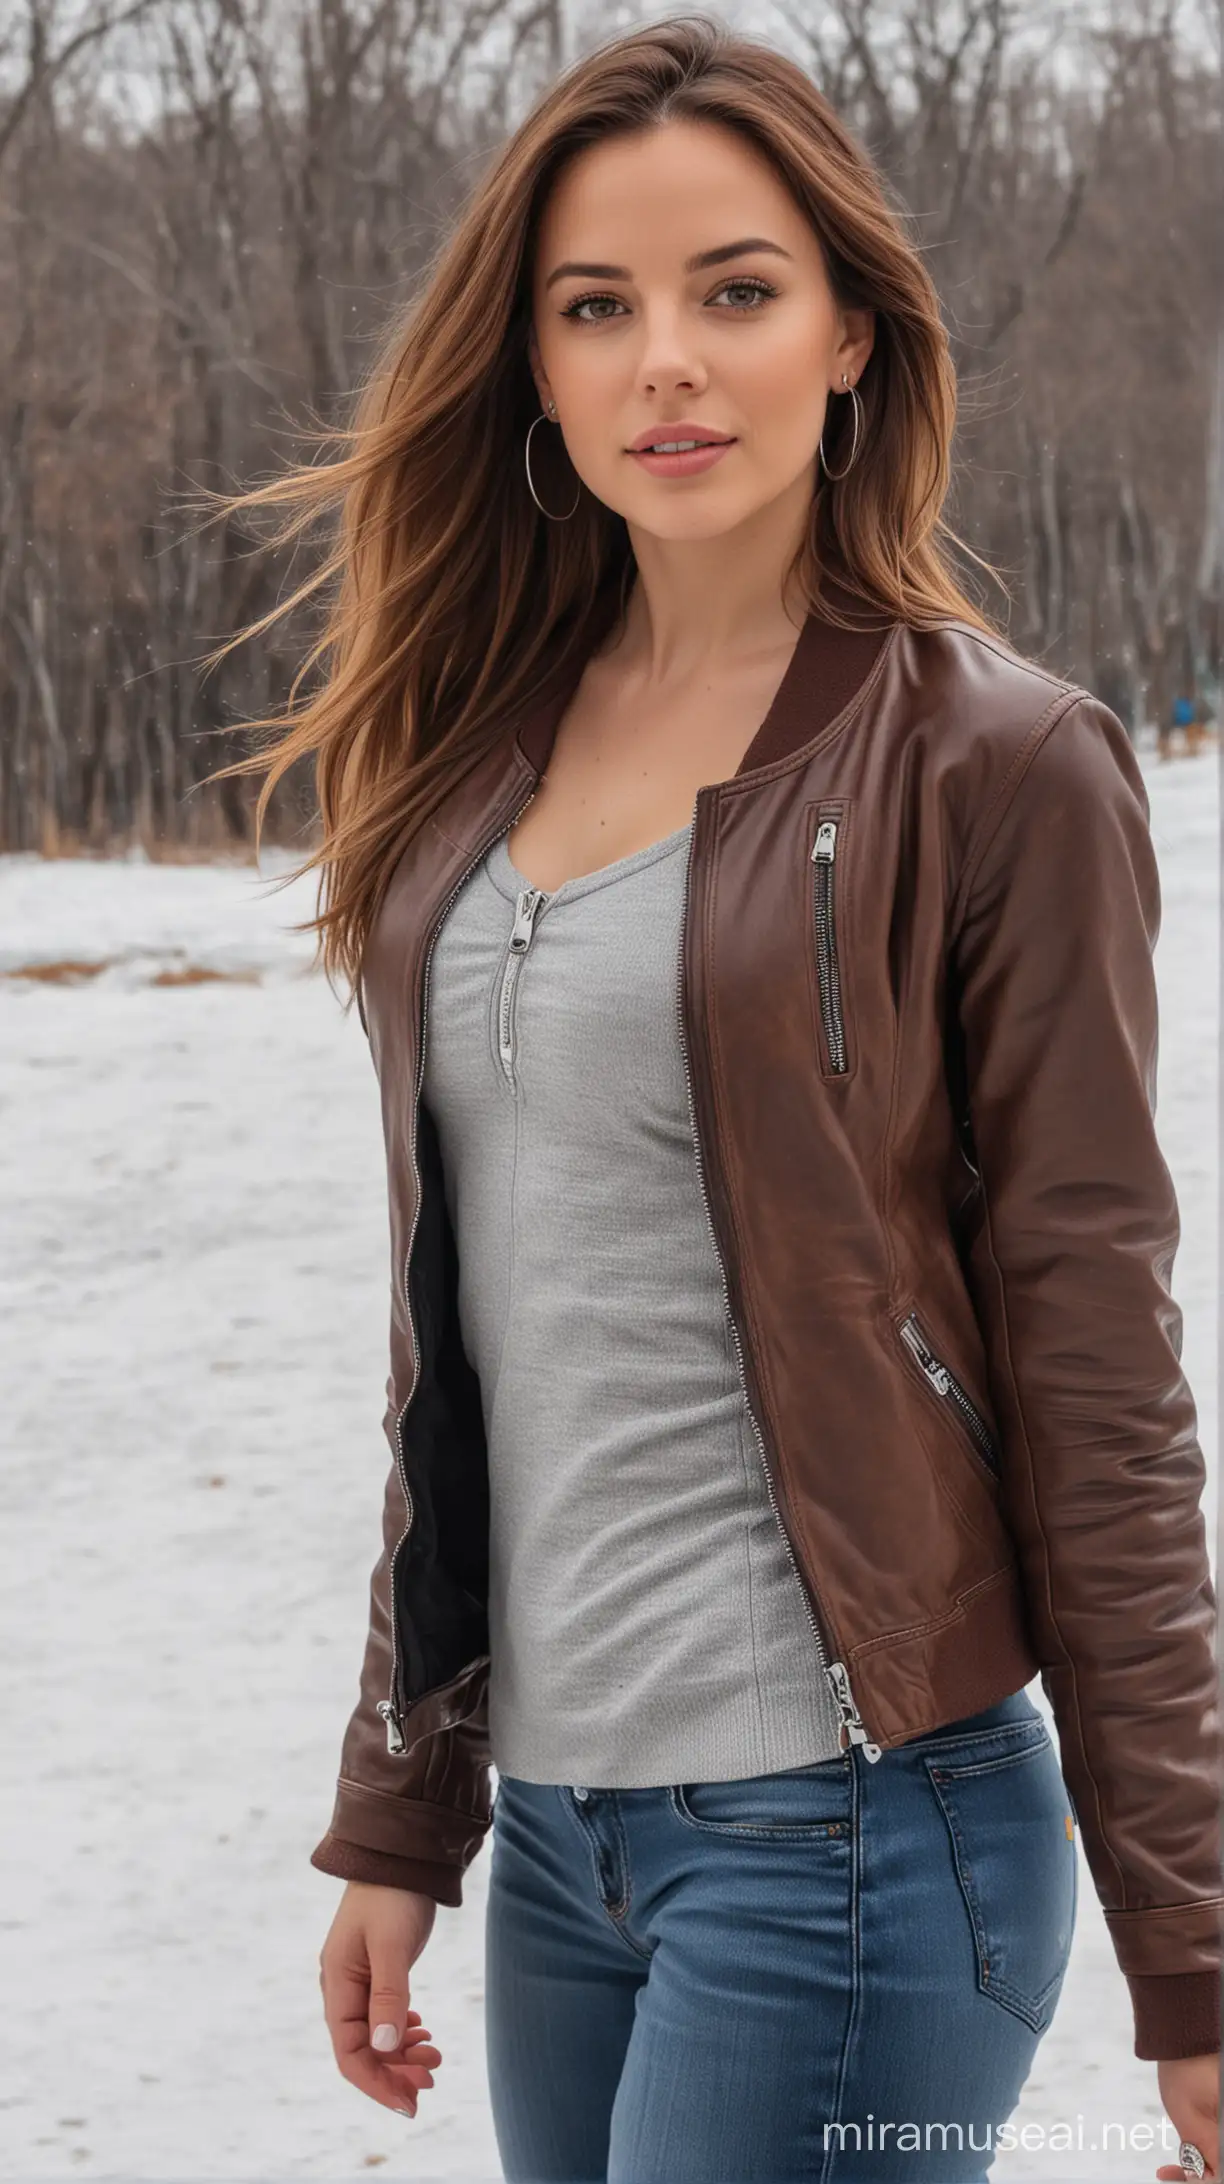 4k Ai art beautiful USA girl brown hair ear rings smart watch in hand black jeans and brown leather zipper jacket and silver bra in usa ice skating ground